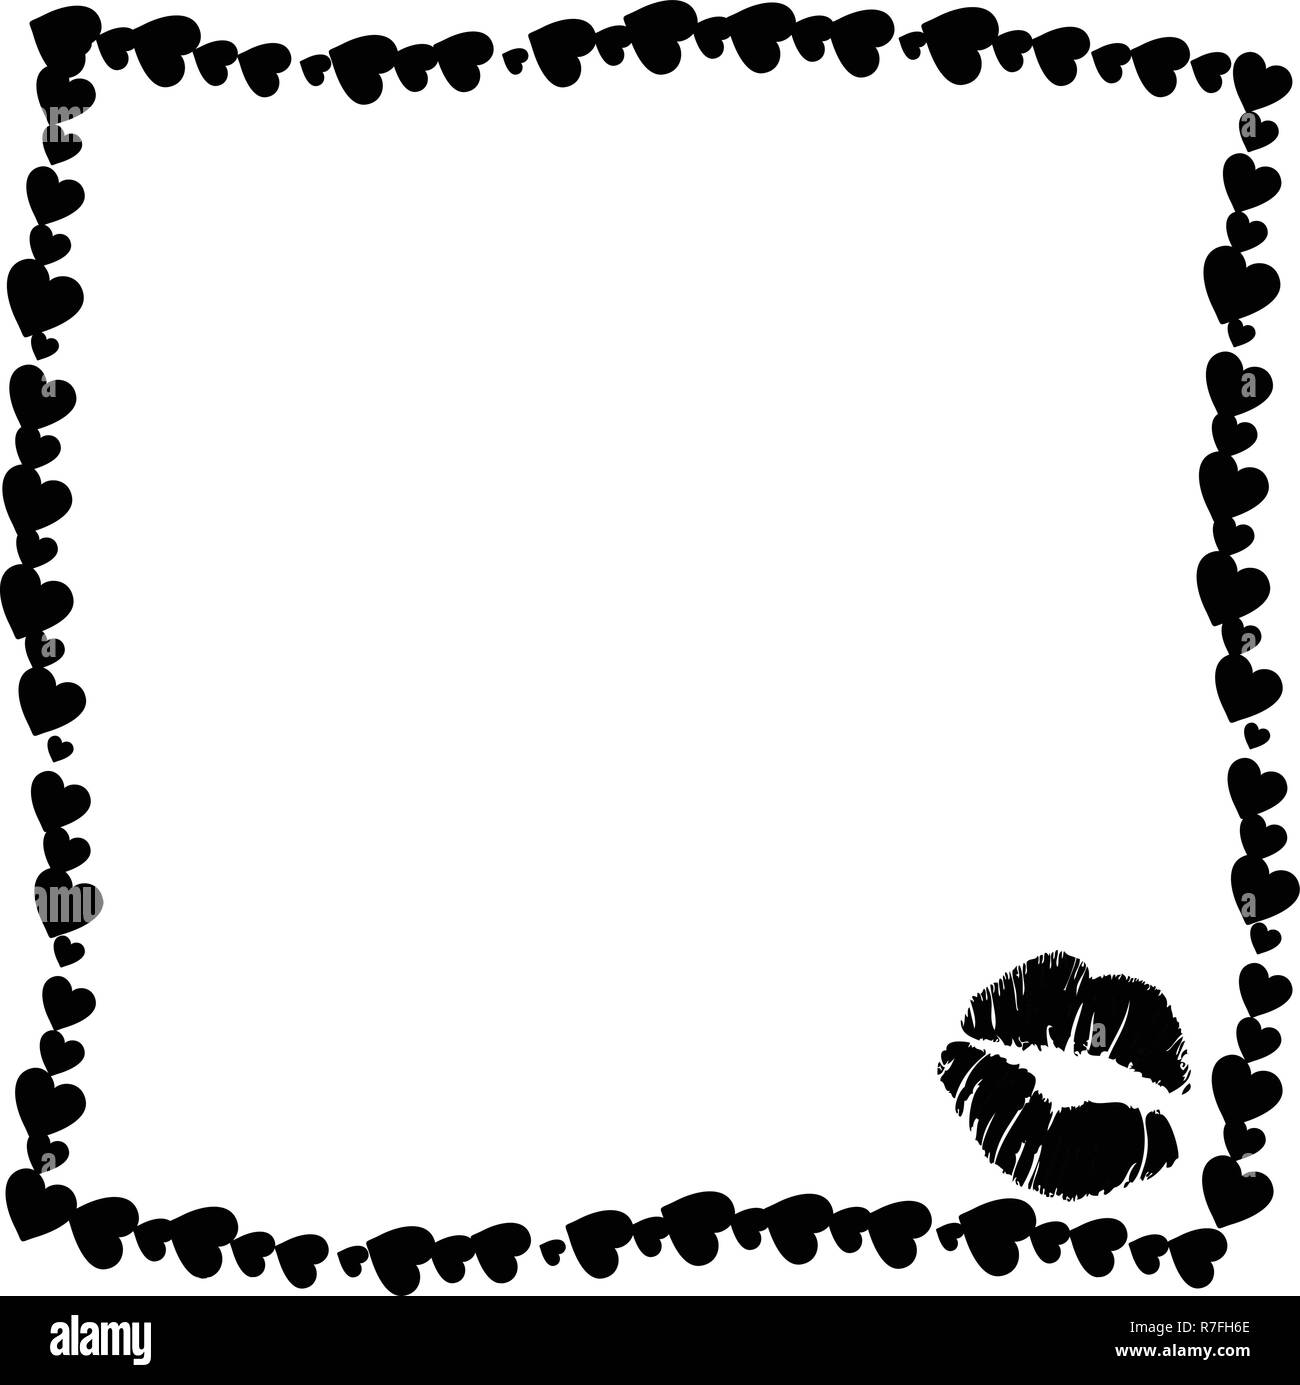 Vector black and white retro vintage border photo frame of hearts with kiss mark silhouette in corner. Monochrome template with copy space for Valenti Stock Vector